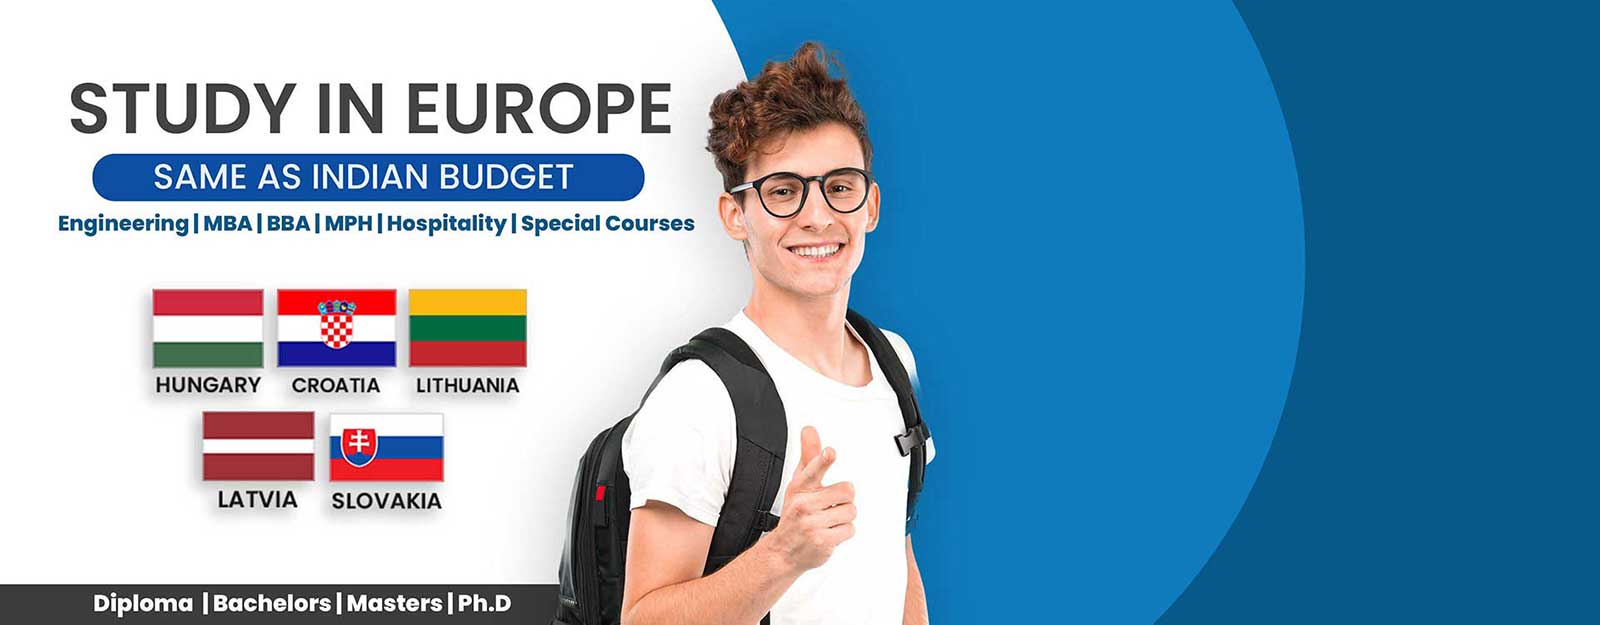 Study in europe